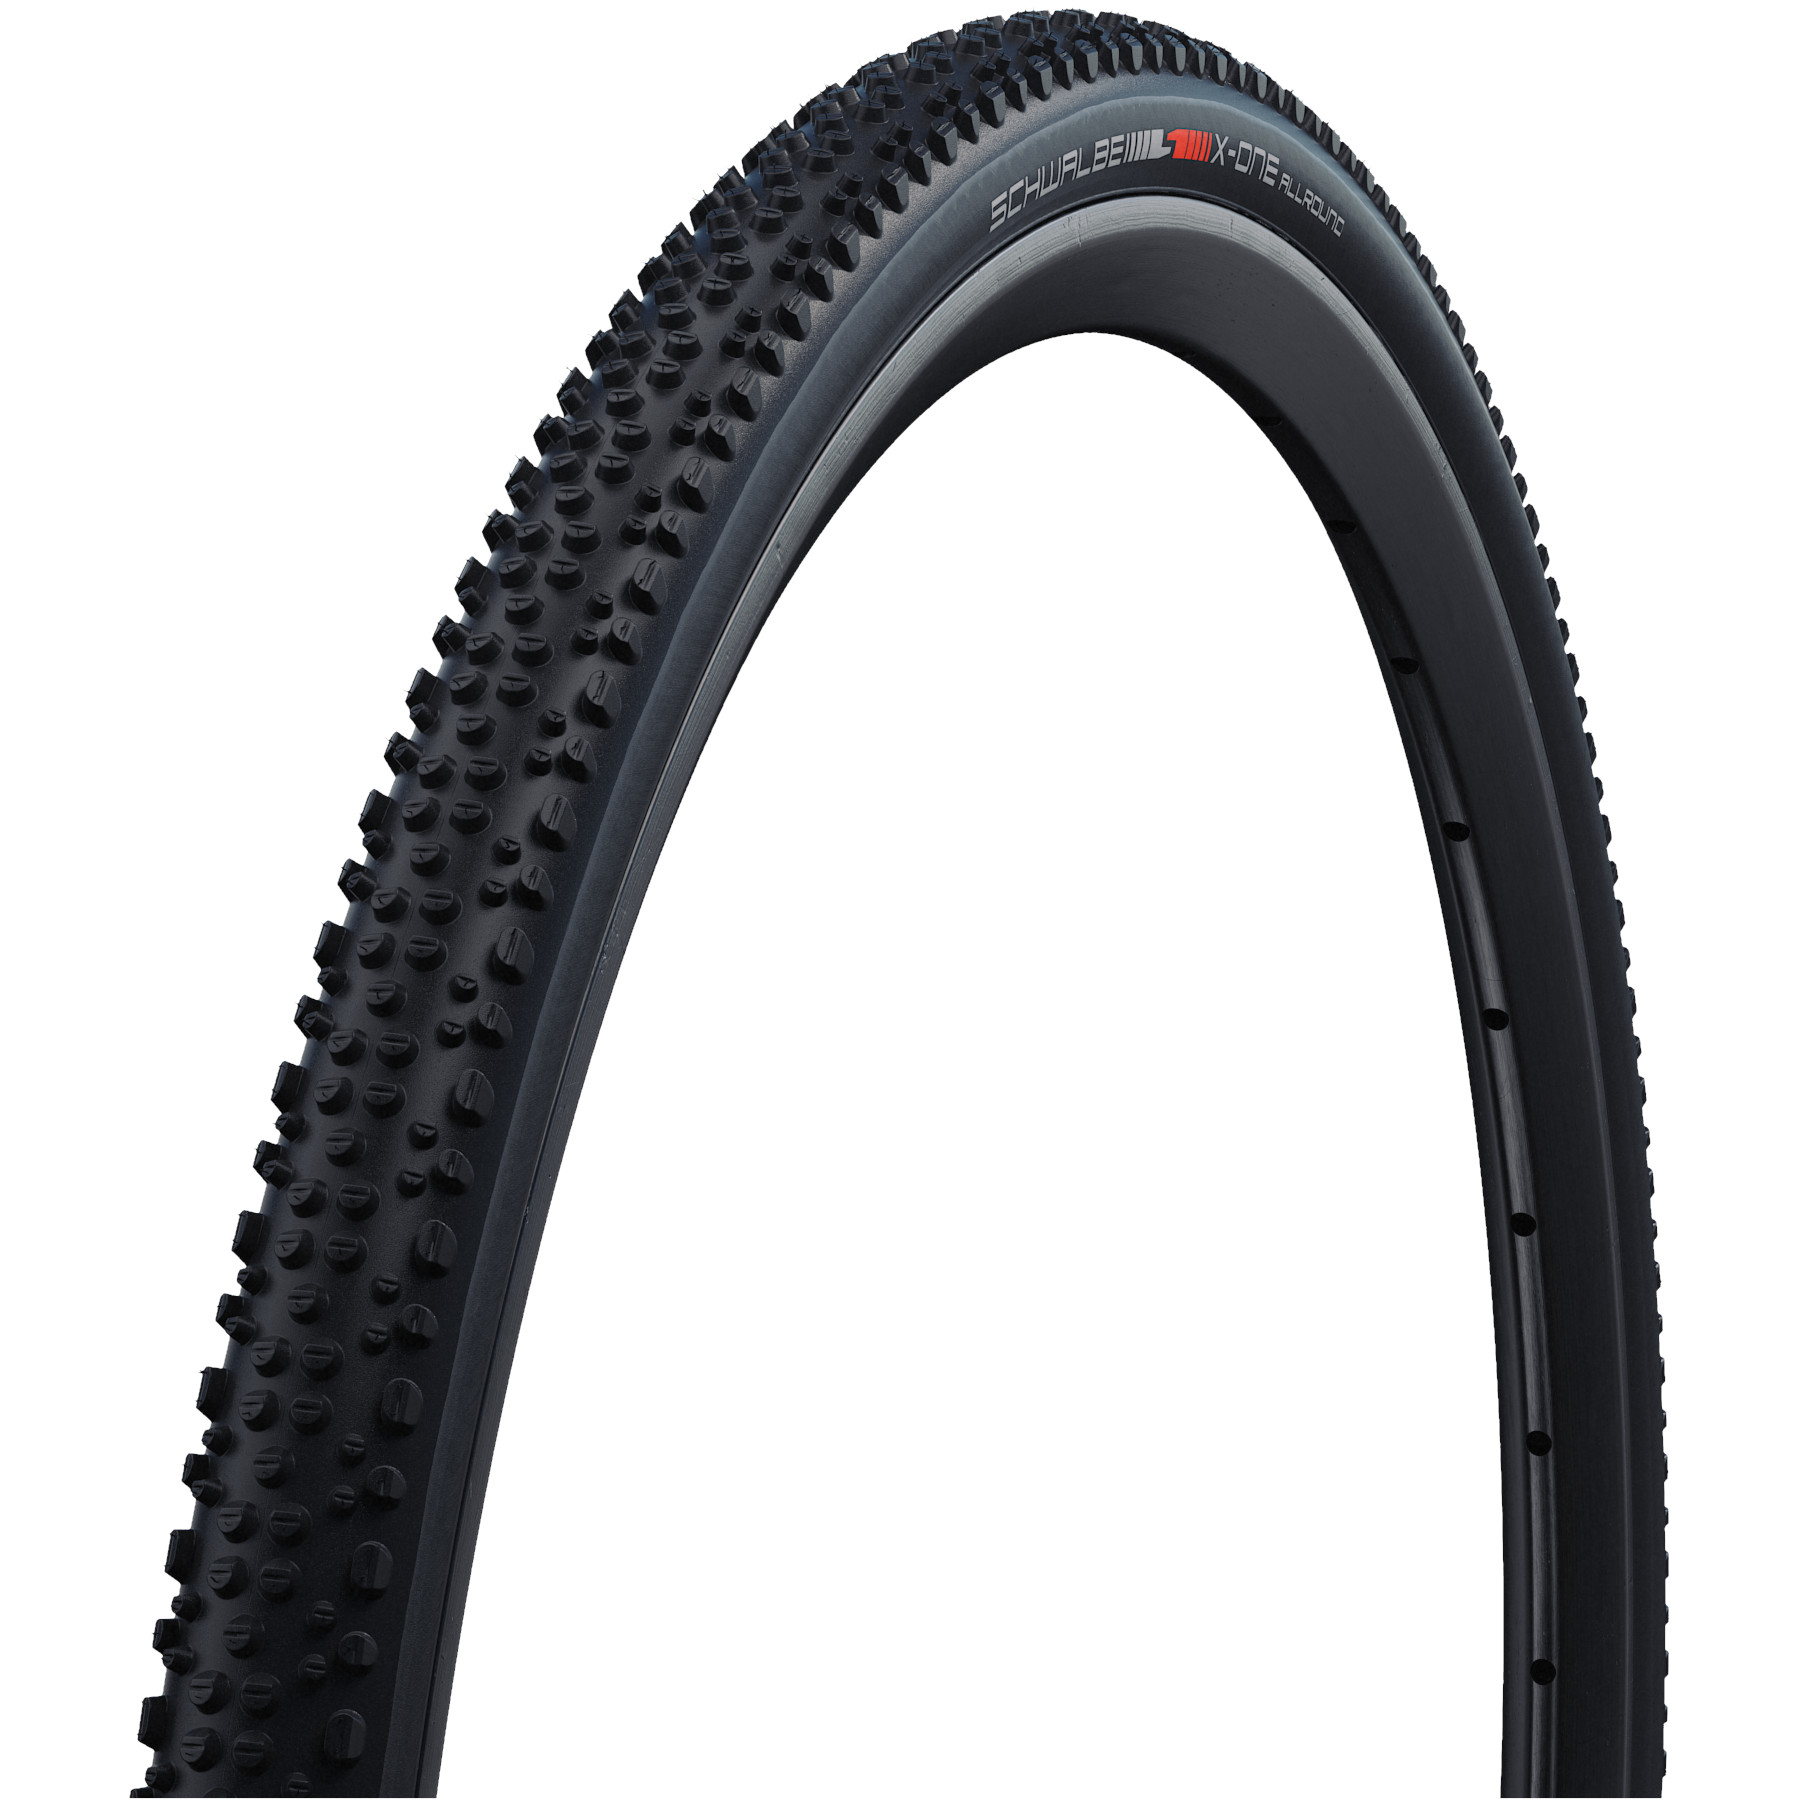 Productfoto van Schwalbe X-One Allround Vouwband - Performance | Addix | Race Guard | TLEasy - 33-622 | Black